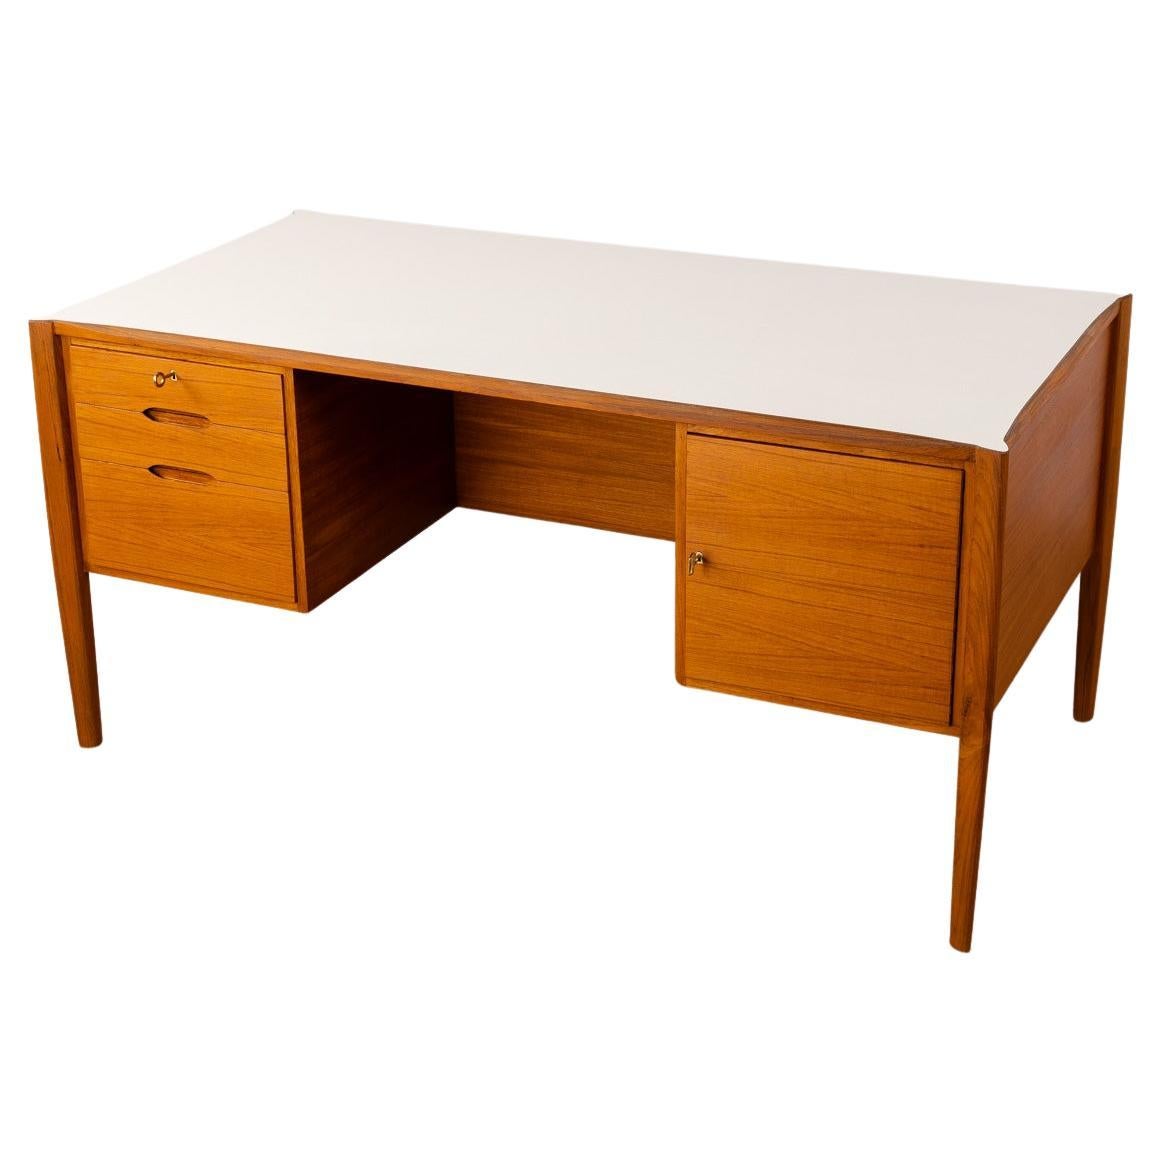 Wilhelm Renz Freestanding Desk with Drawers, from, 1960s For Sale